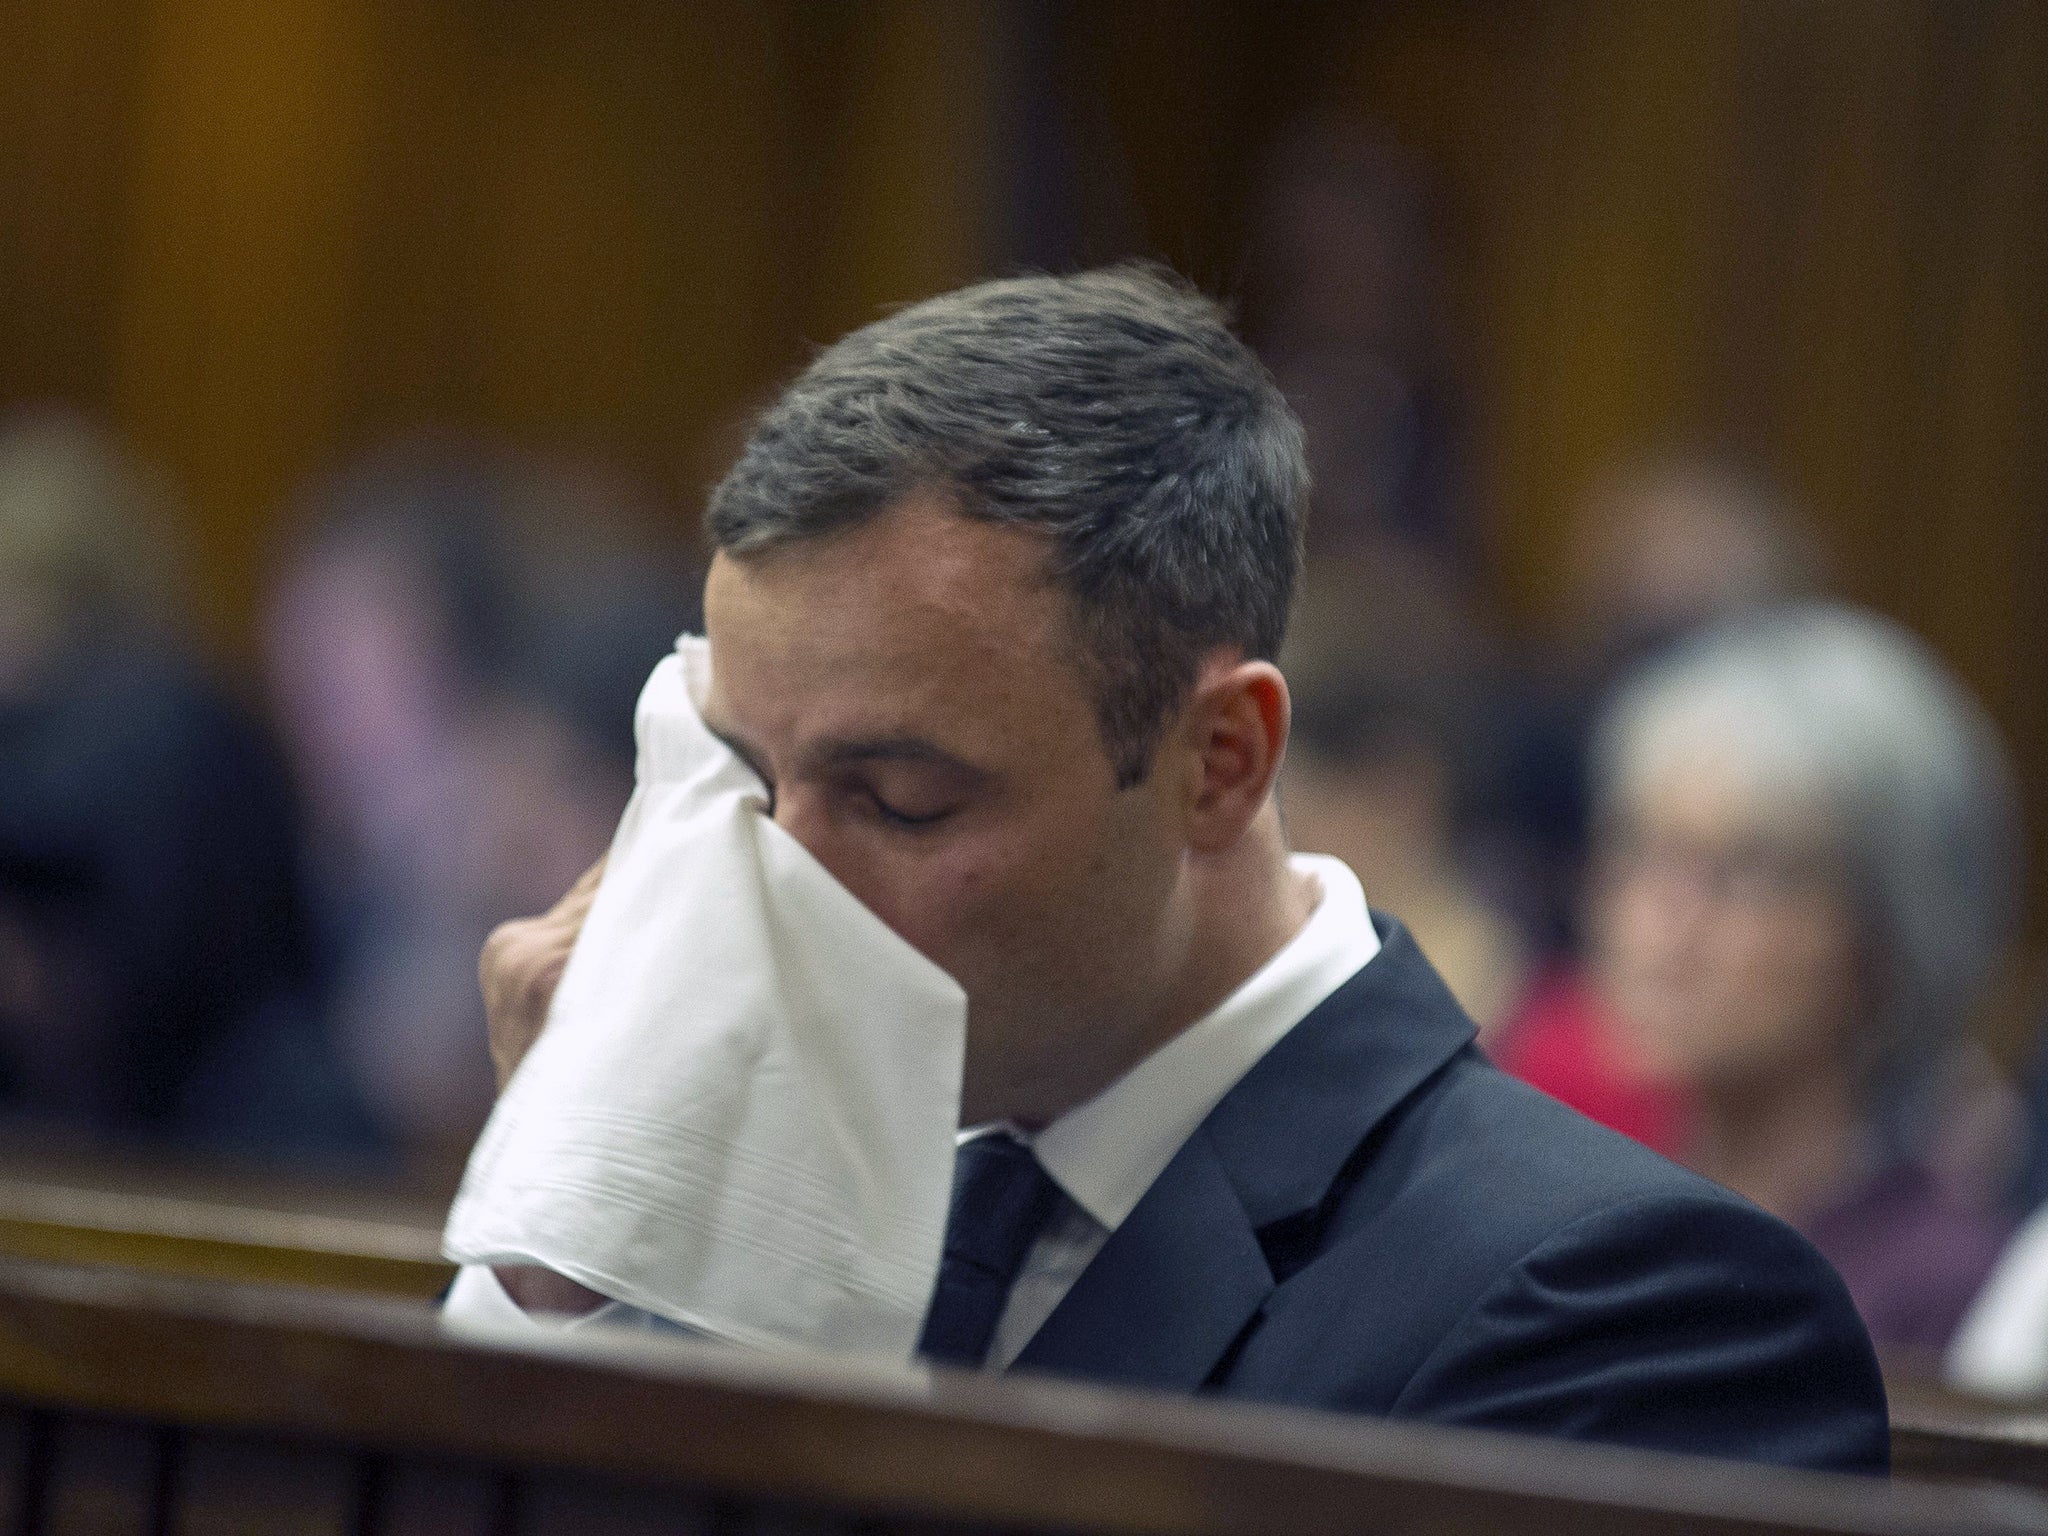 Oscar Pistorius cries during his fifth day of sentencing hearing at the North Gauteng High Court in Pretoria